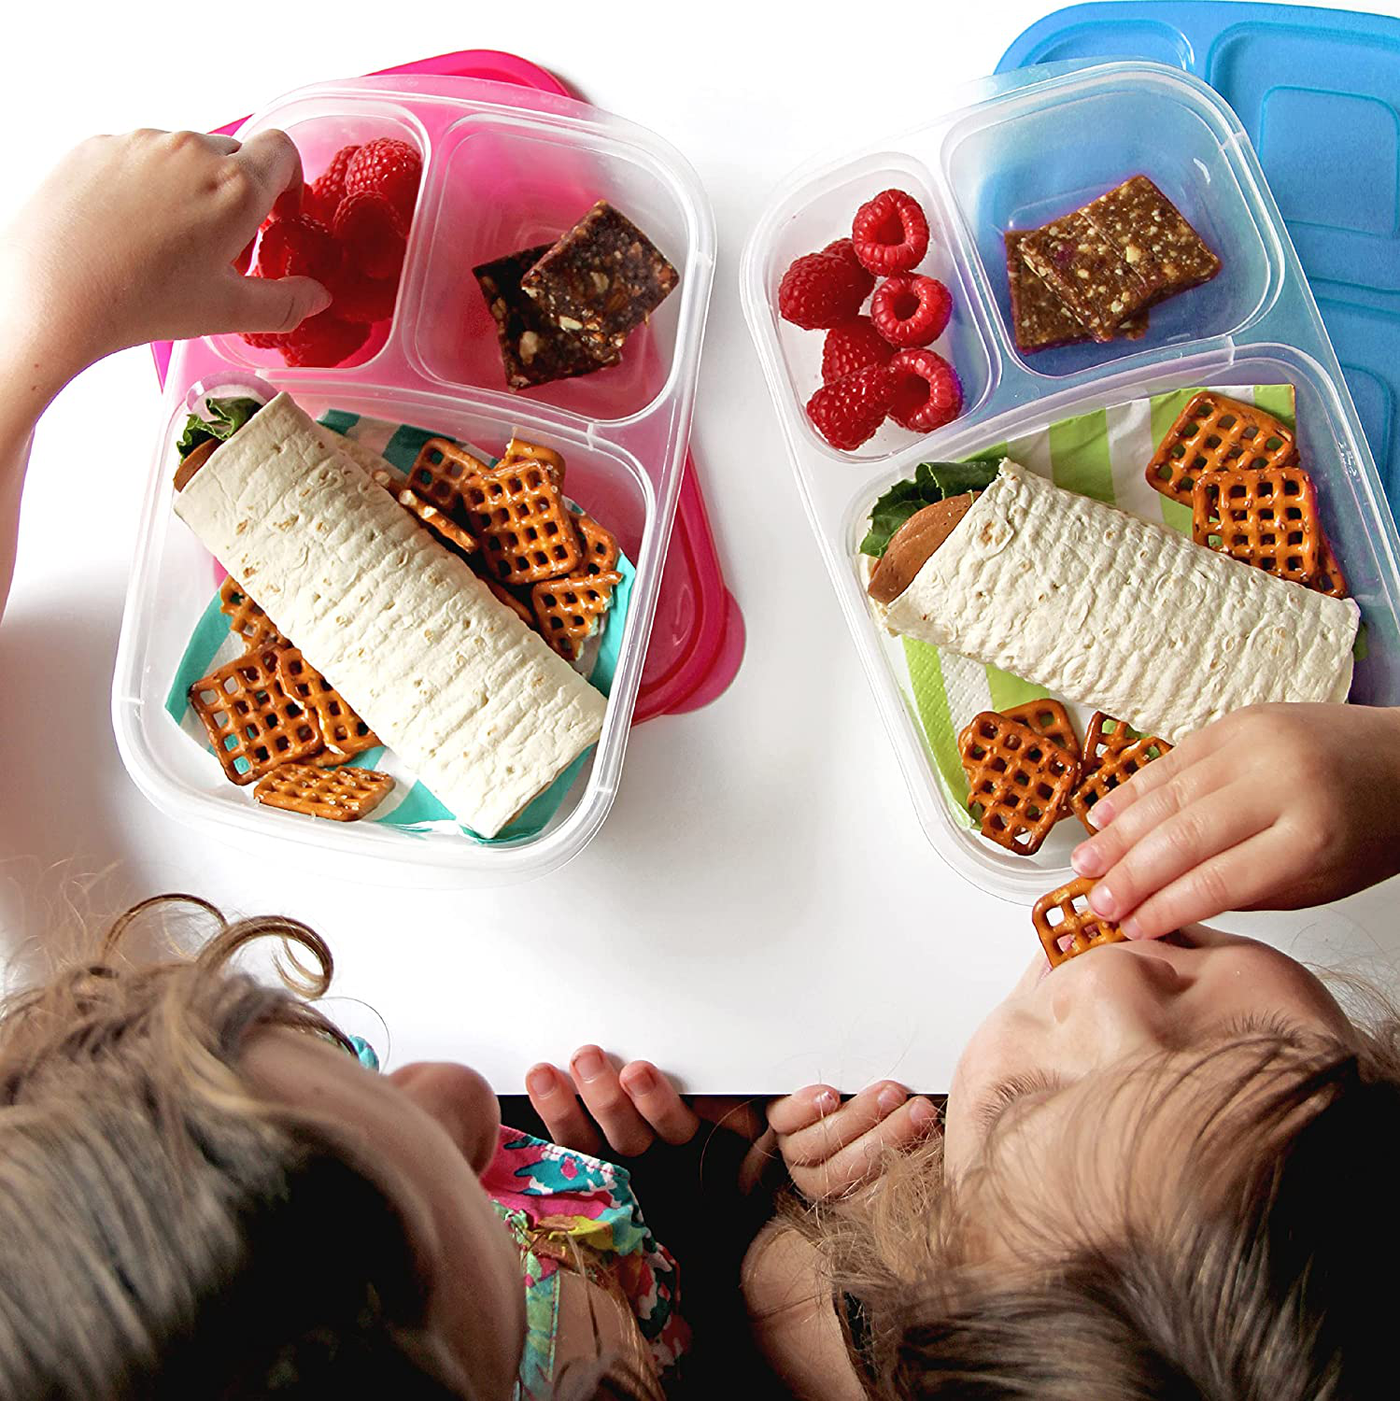 EasyLunchboxes - Bento Lunch Boxes - Reusable 3-Compartment Food Containers for School, Work, and Travel, Set of 4, Brights